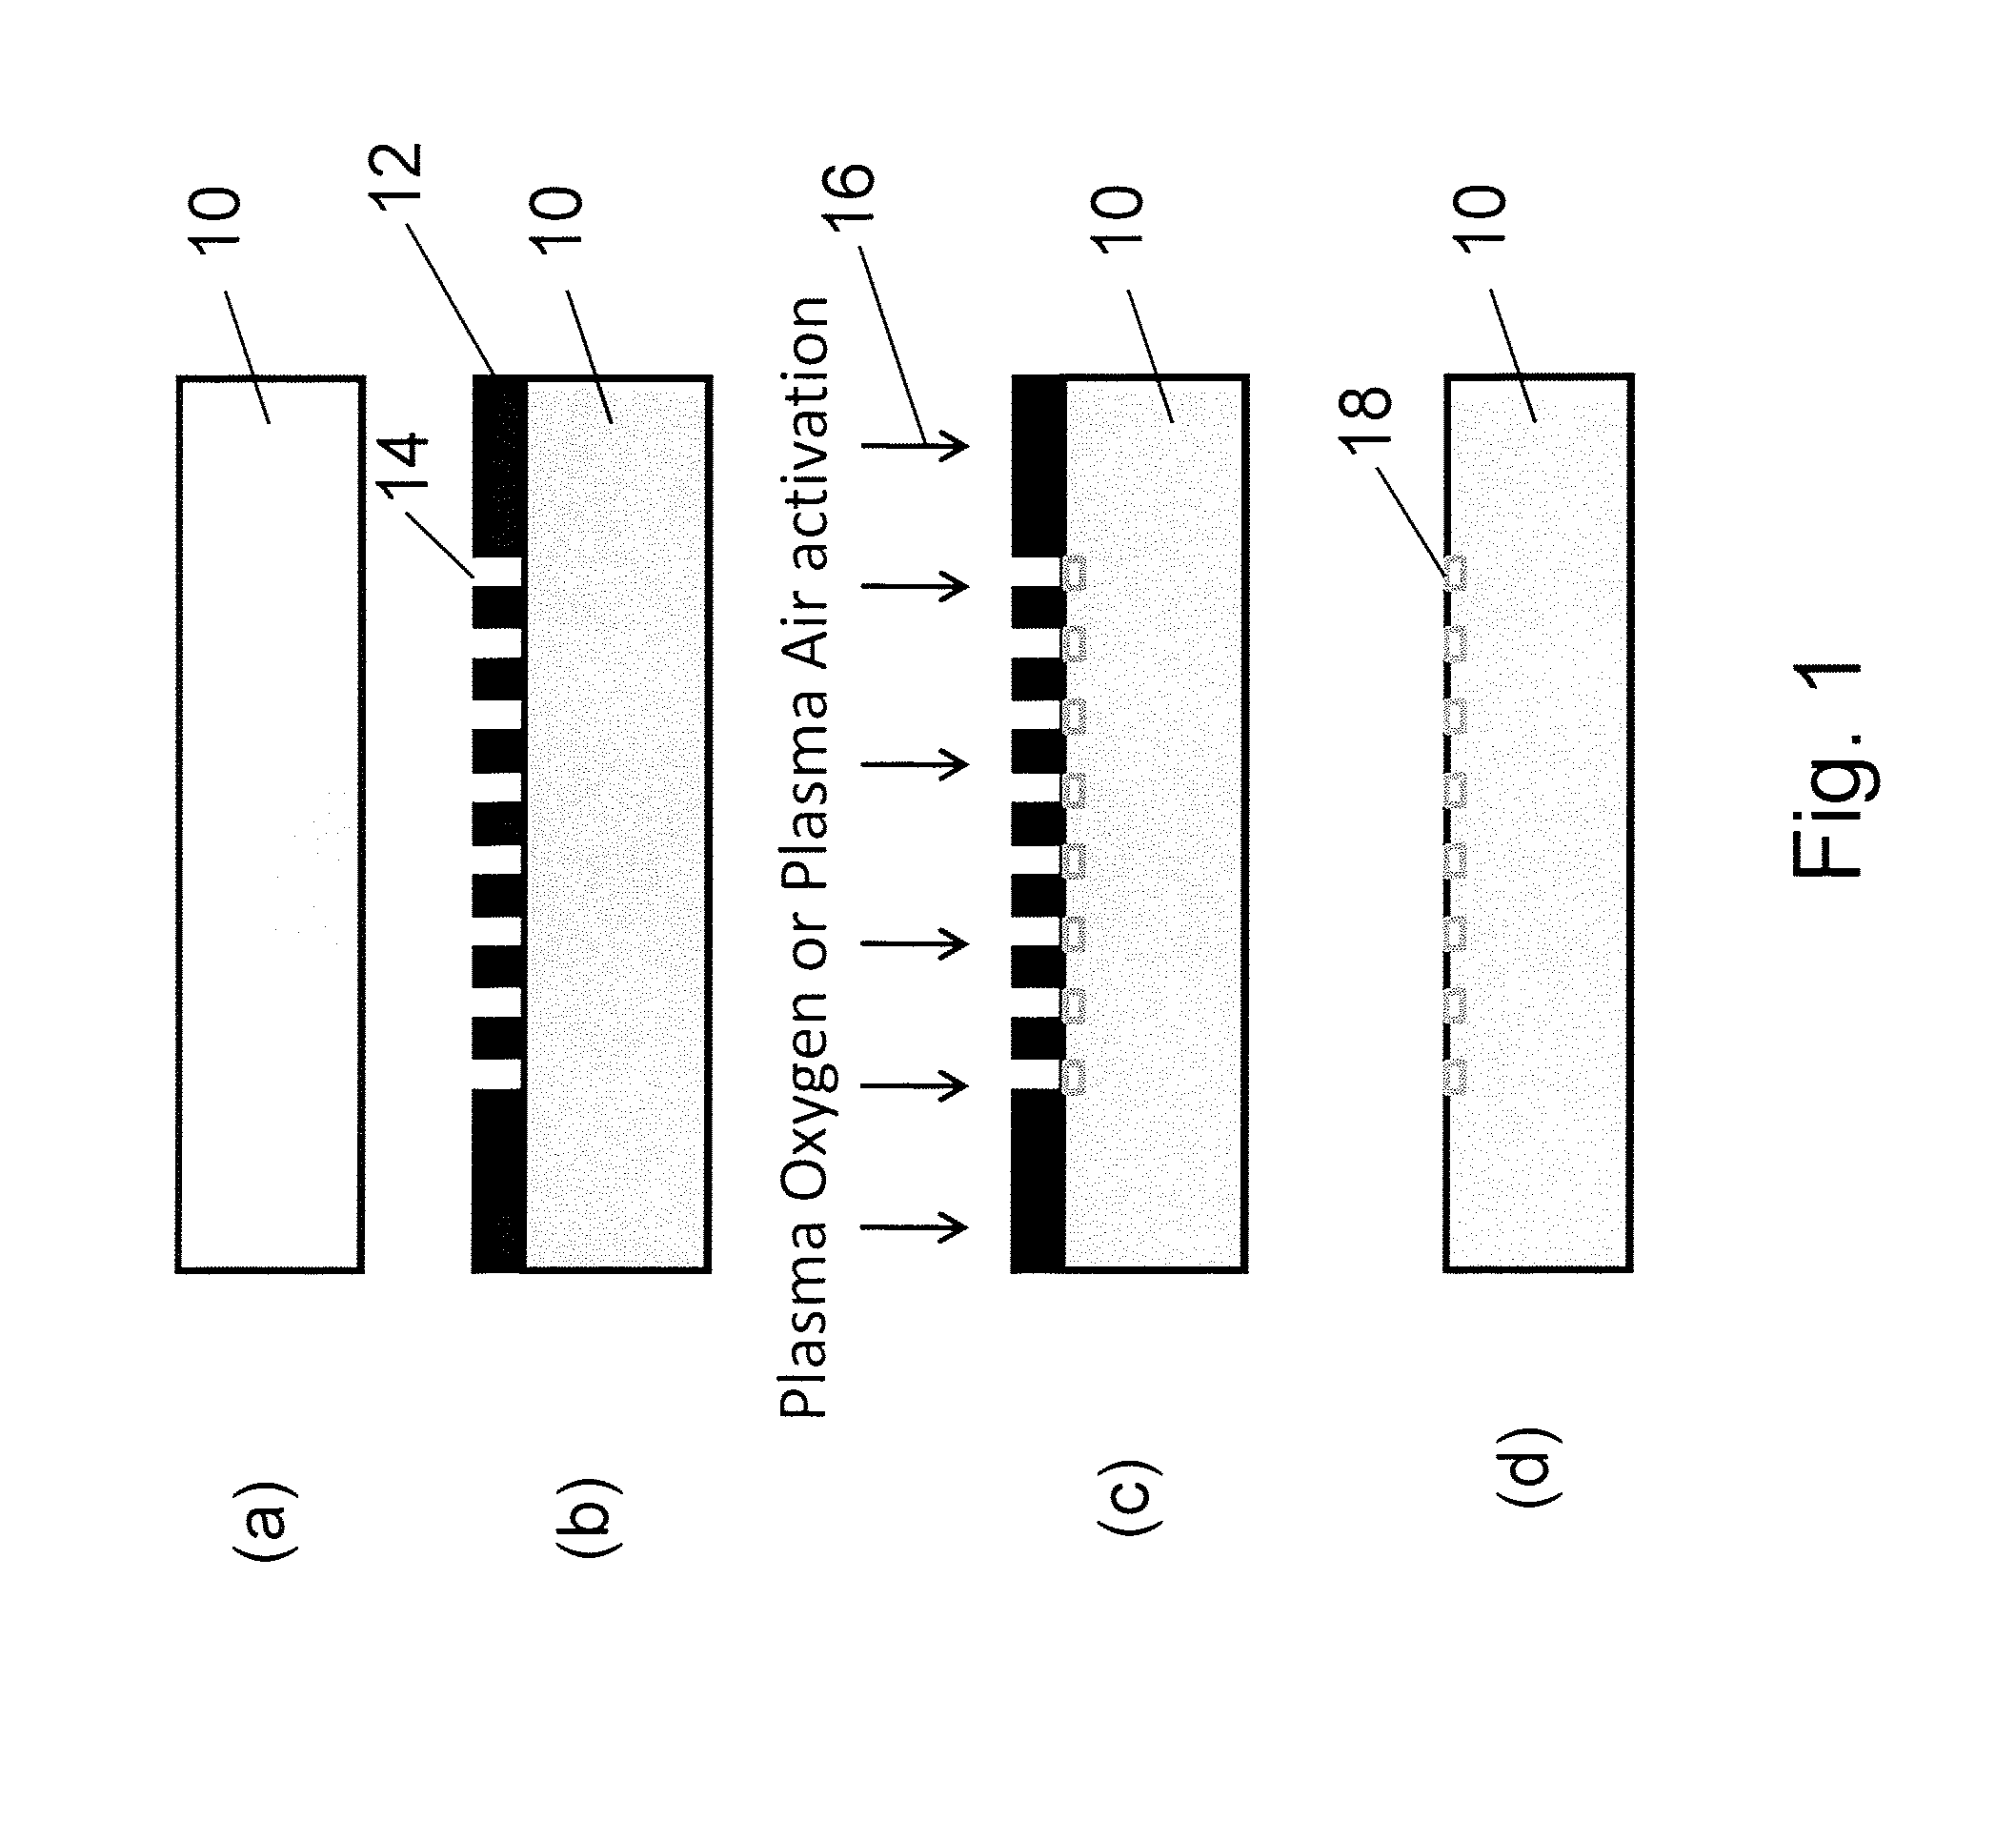 Selective Plasma Activation for Medical Implants and Wound Healing Devices